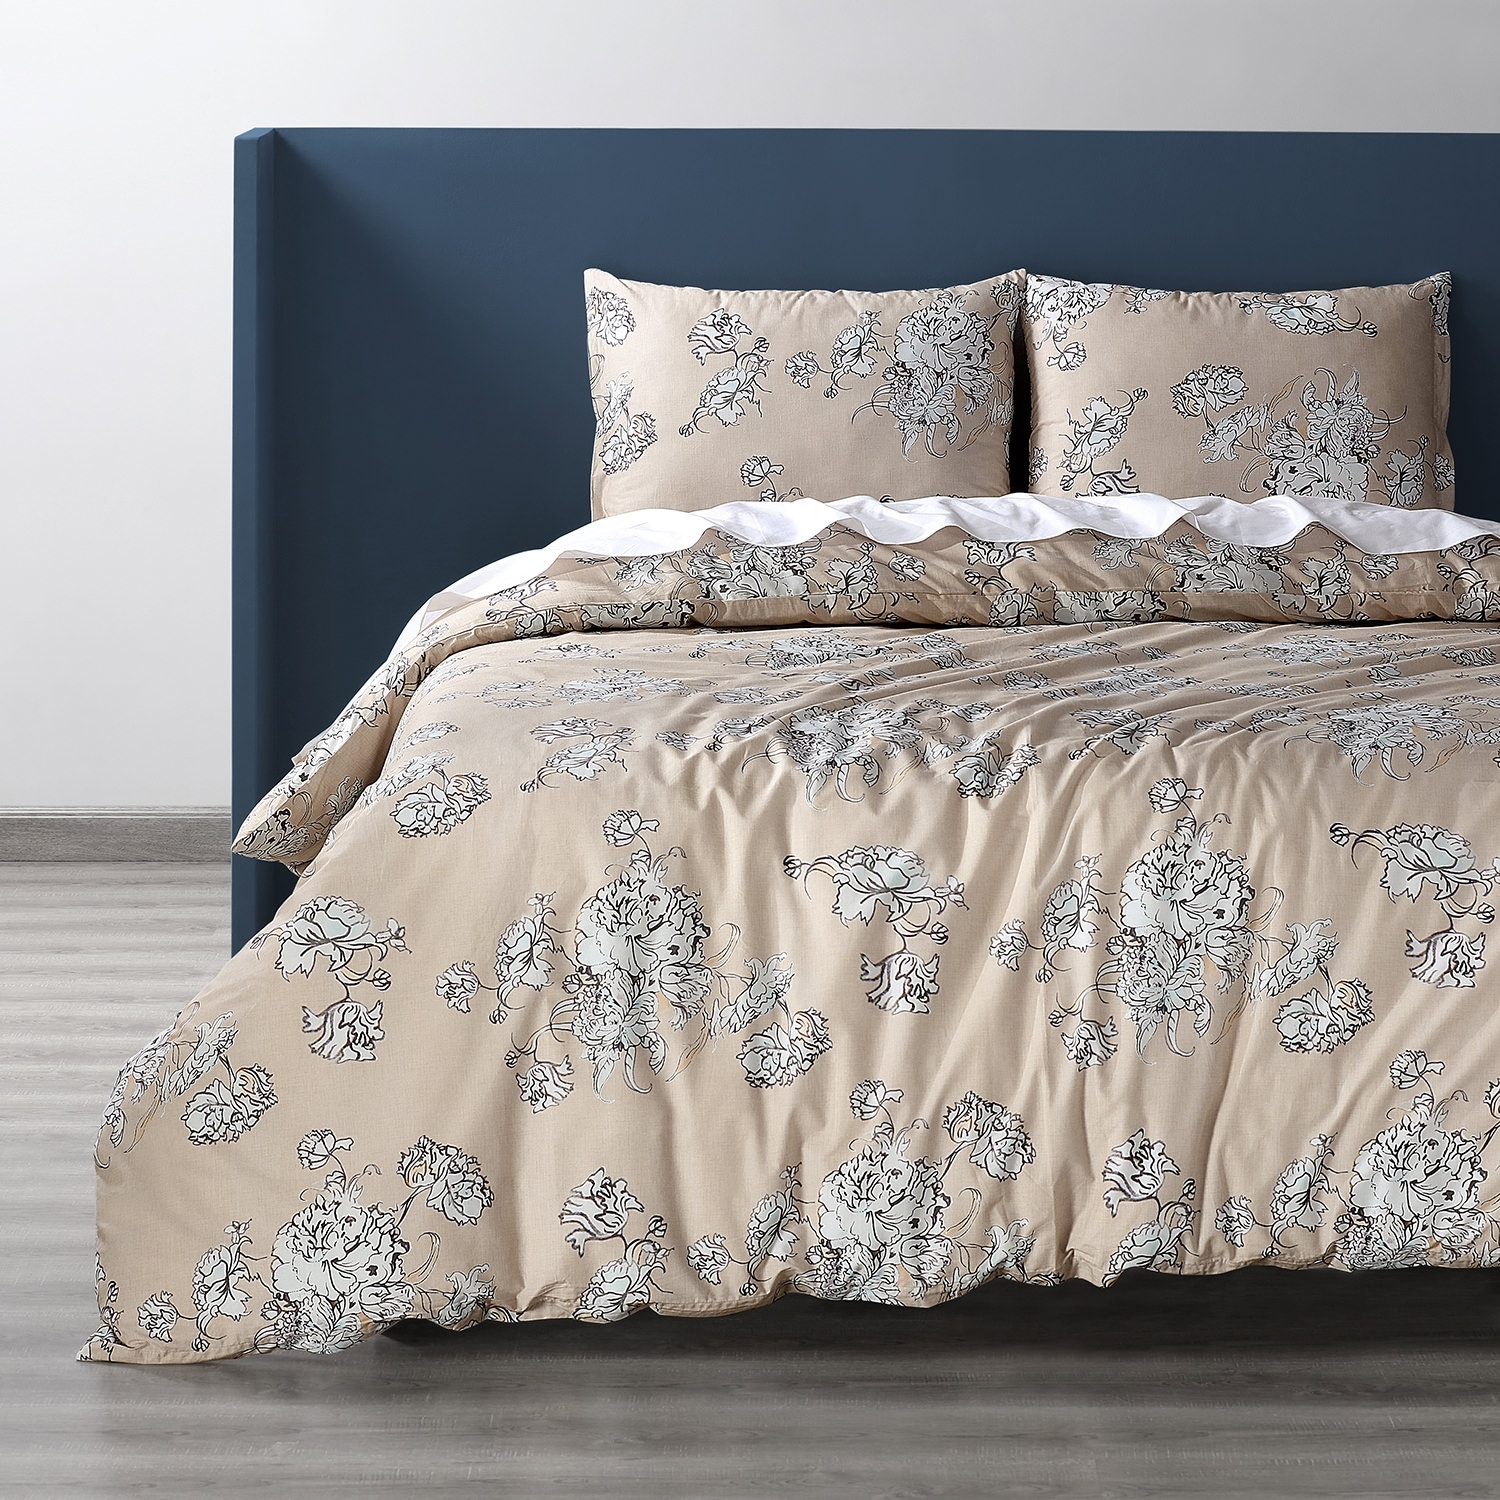 Fabstyles Arizona Chenille 3 Piece Duvet Cover Set - Grey - King